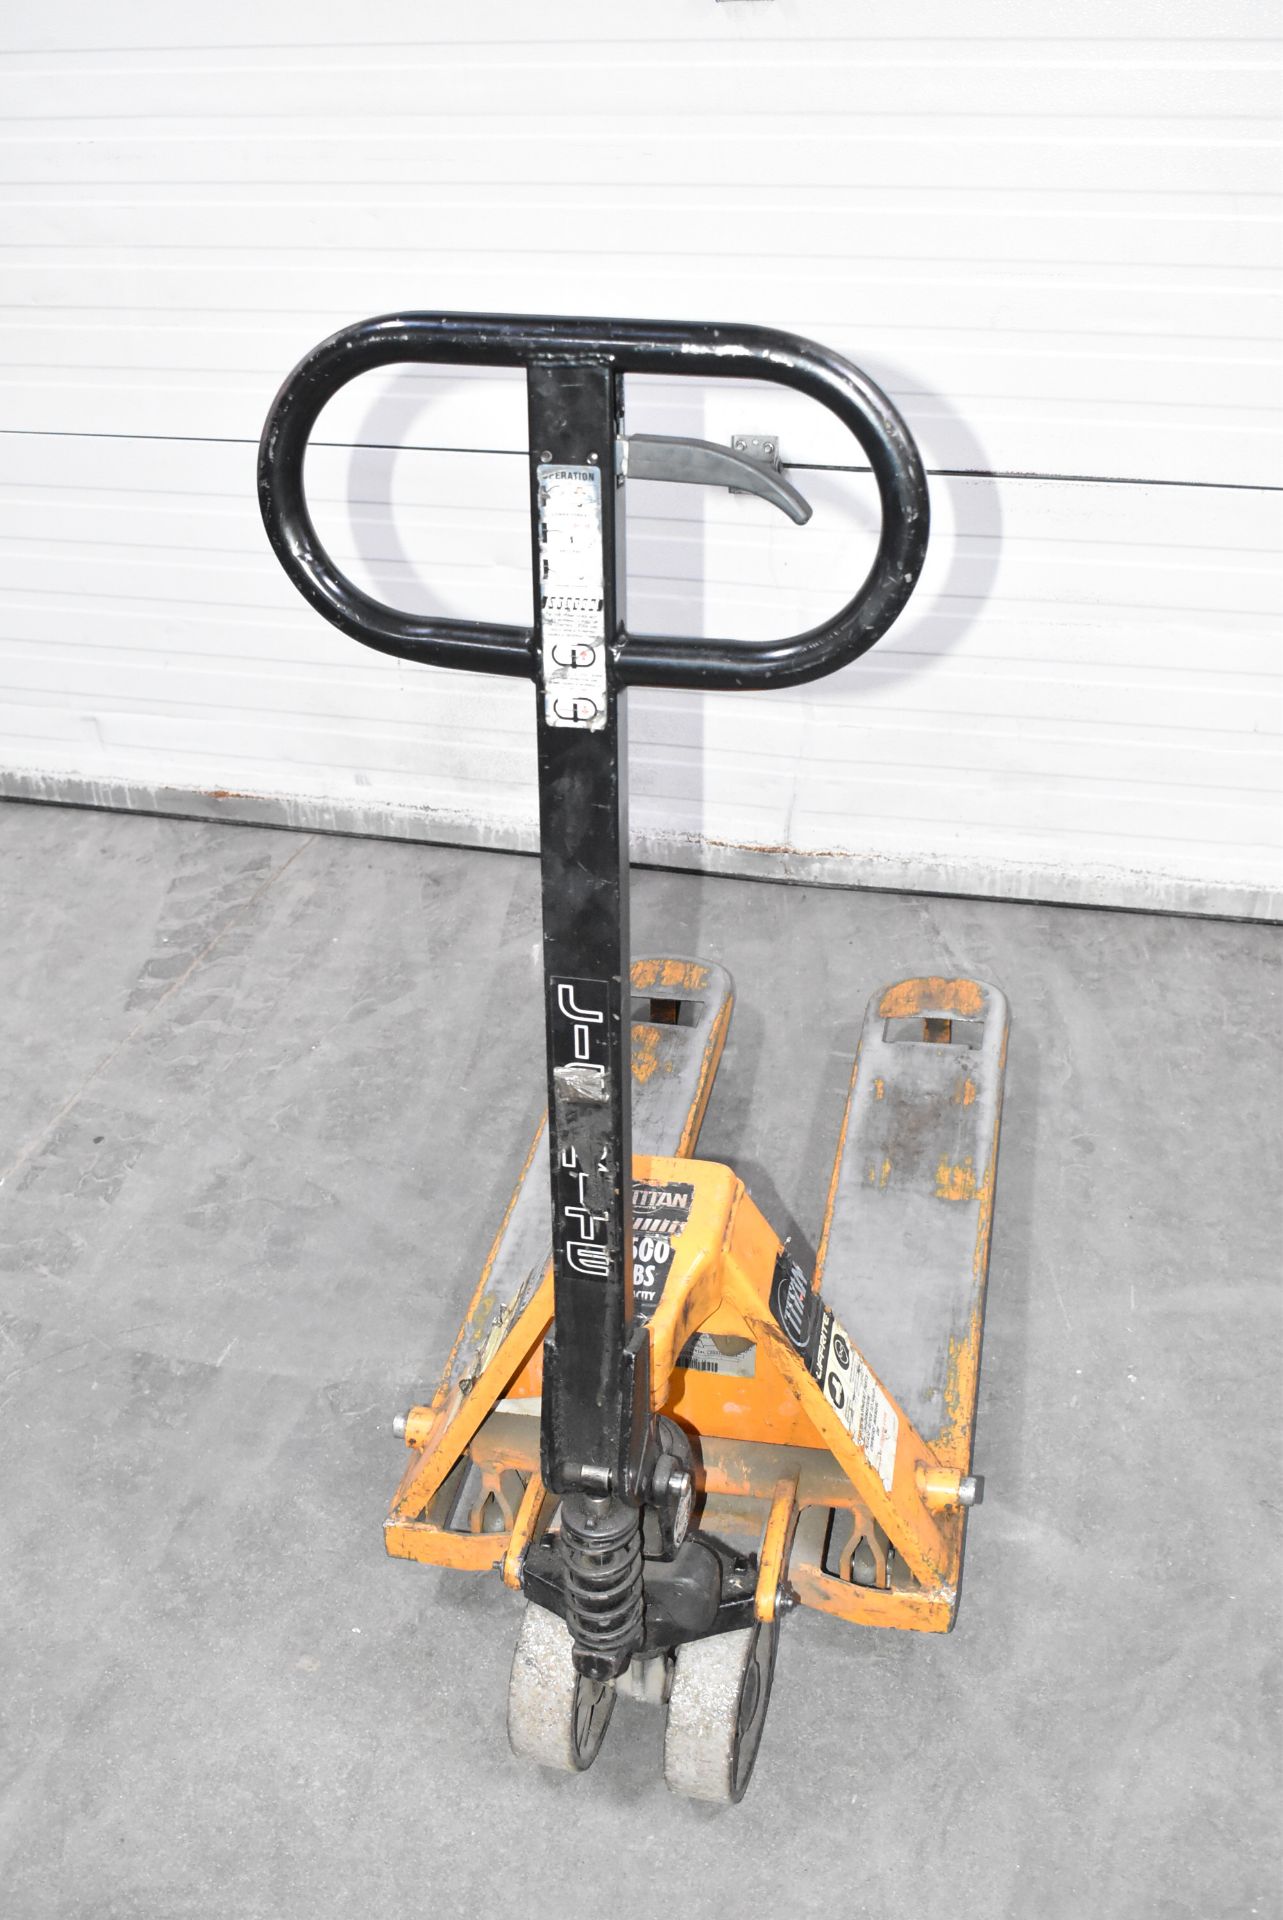 LIFT-RITE LCR55 HYDRAULIC PALLET JACK WITH 5,500 LB CAPACITY, S/N 5037868-11 - Image 3 of 5